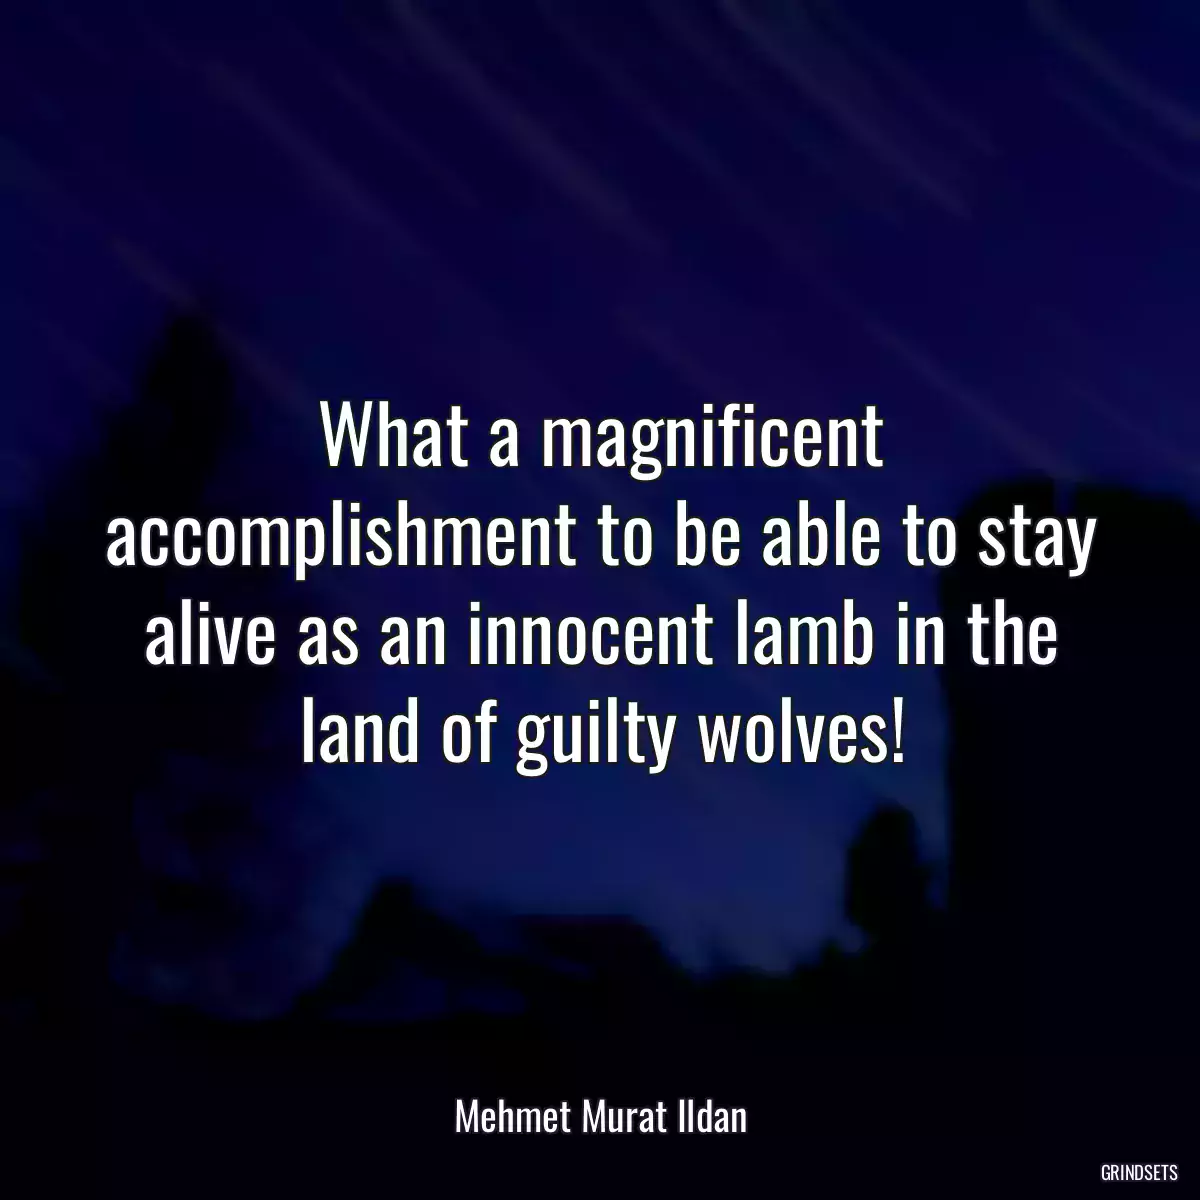 What a magnificent accomplishment to be able to stay alive as an innocent lamb in the land of guilty wolves!